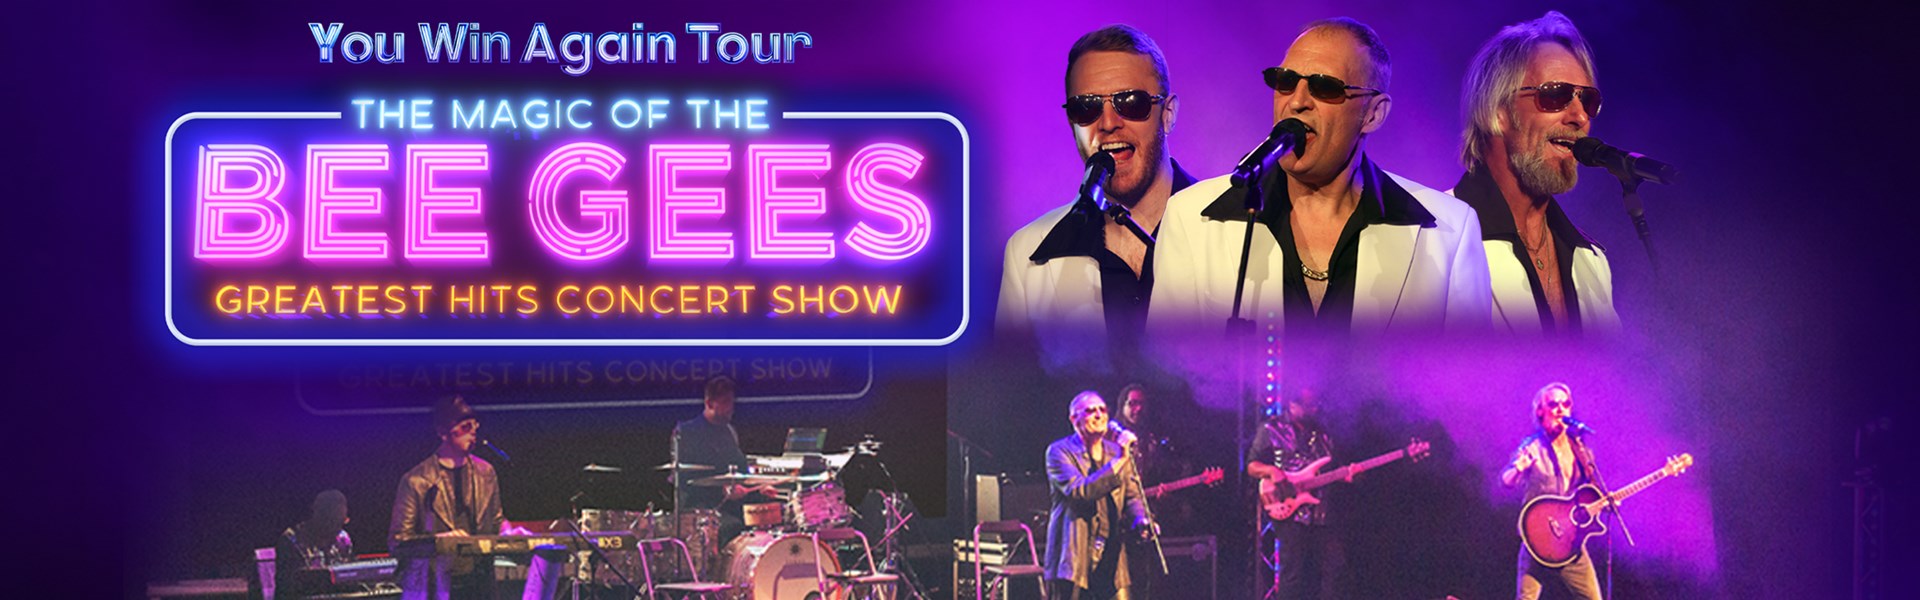 The Magic of the Bee Gees - You Win Again Tour